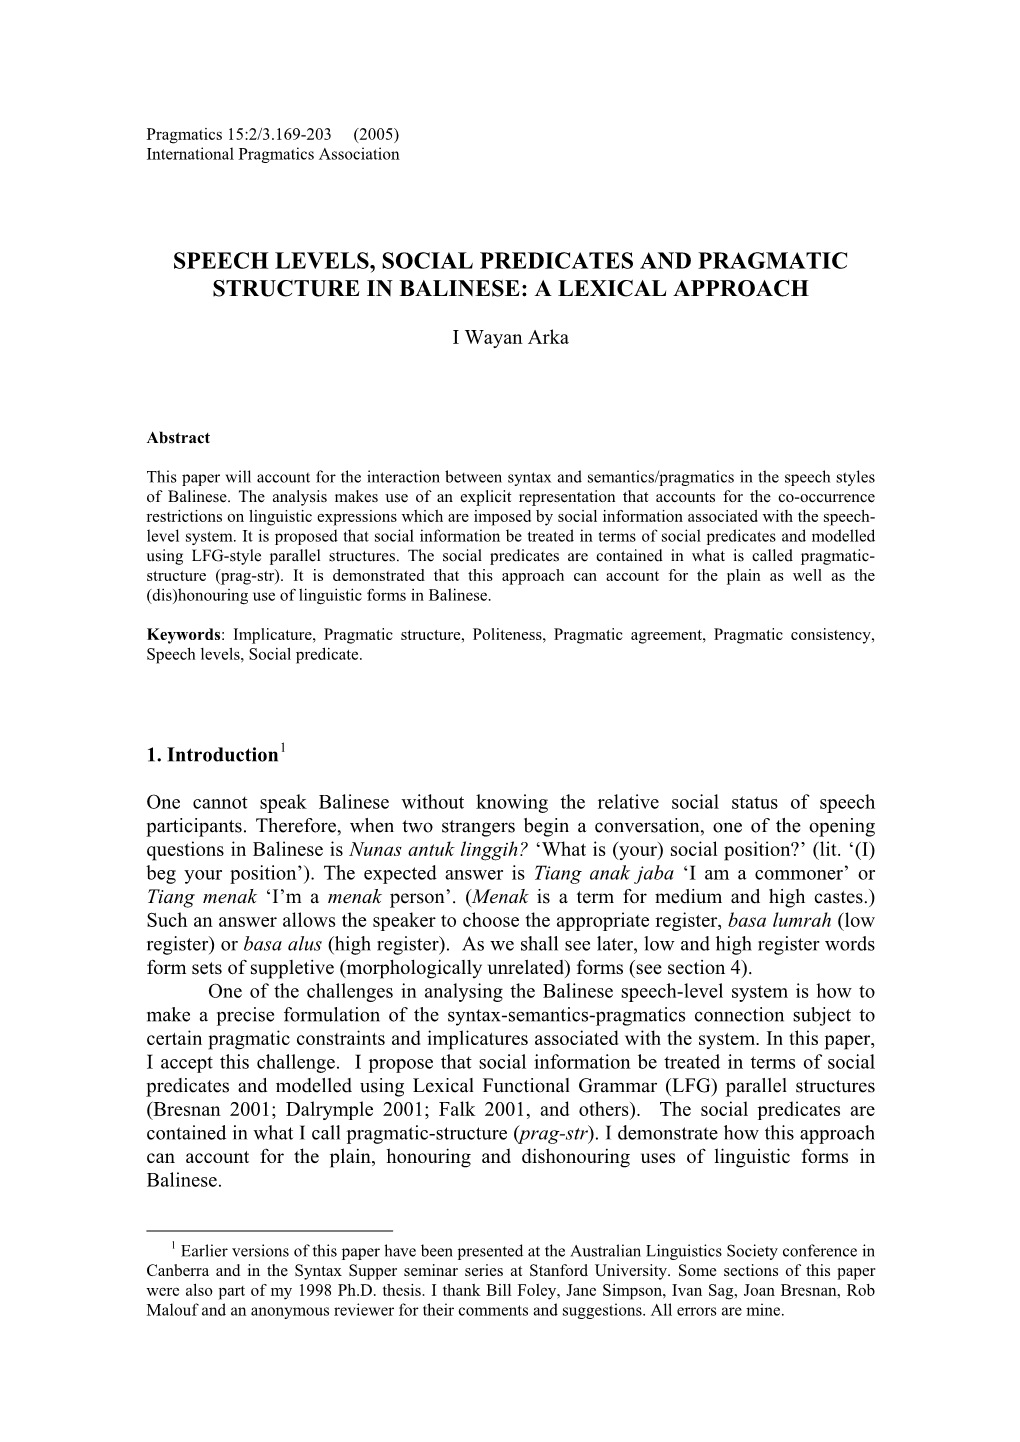 Speech Levels, Social Predicates and Pragmatic Structure in Balinese: a Lexical Approach